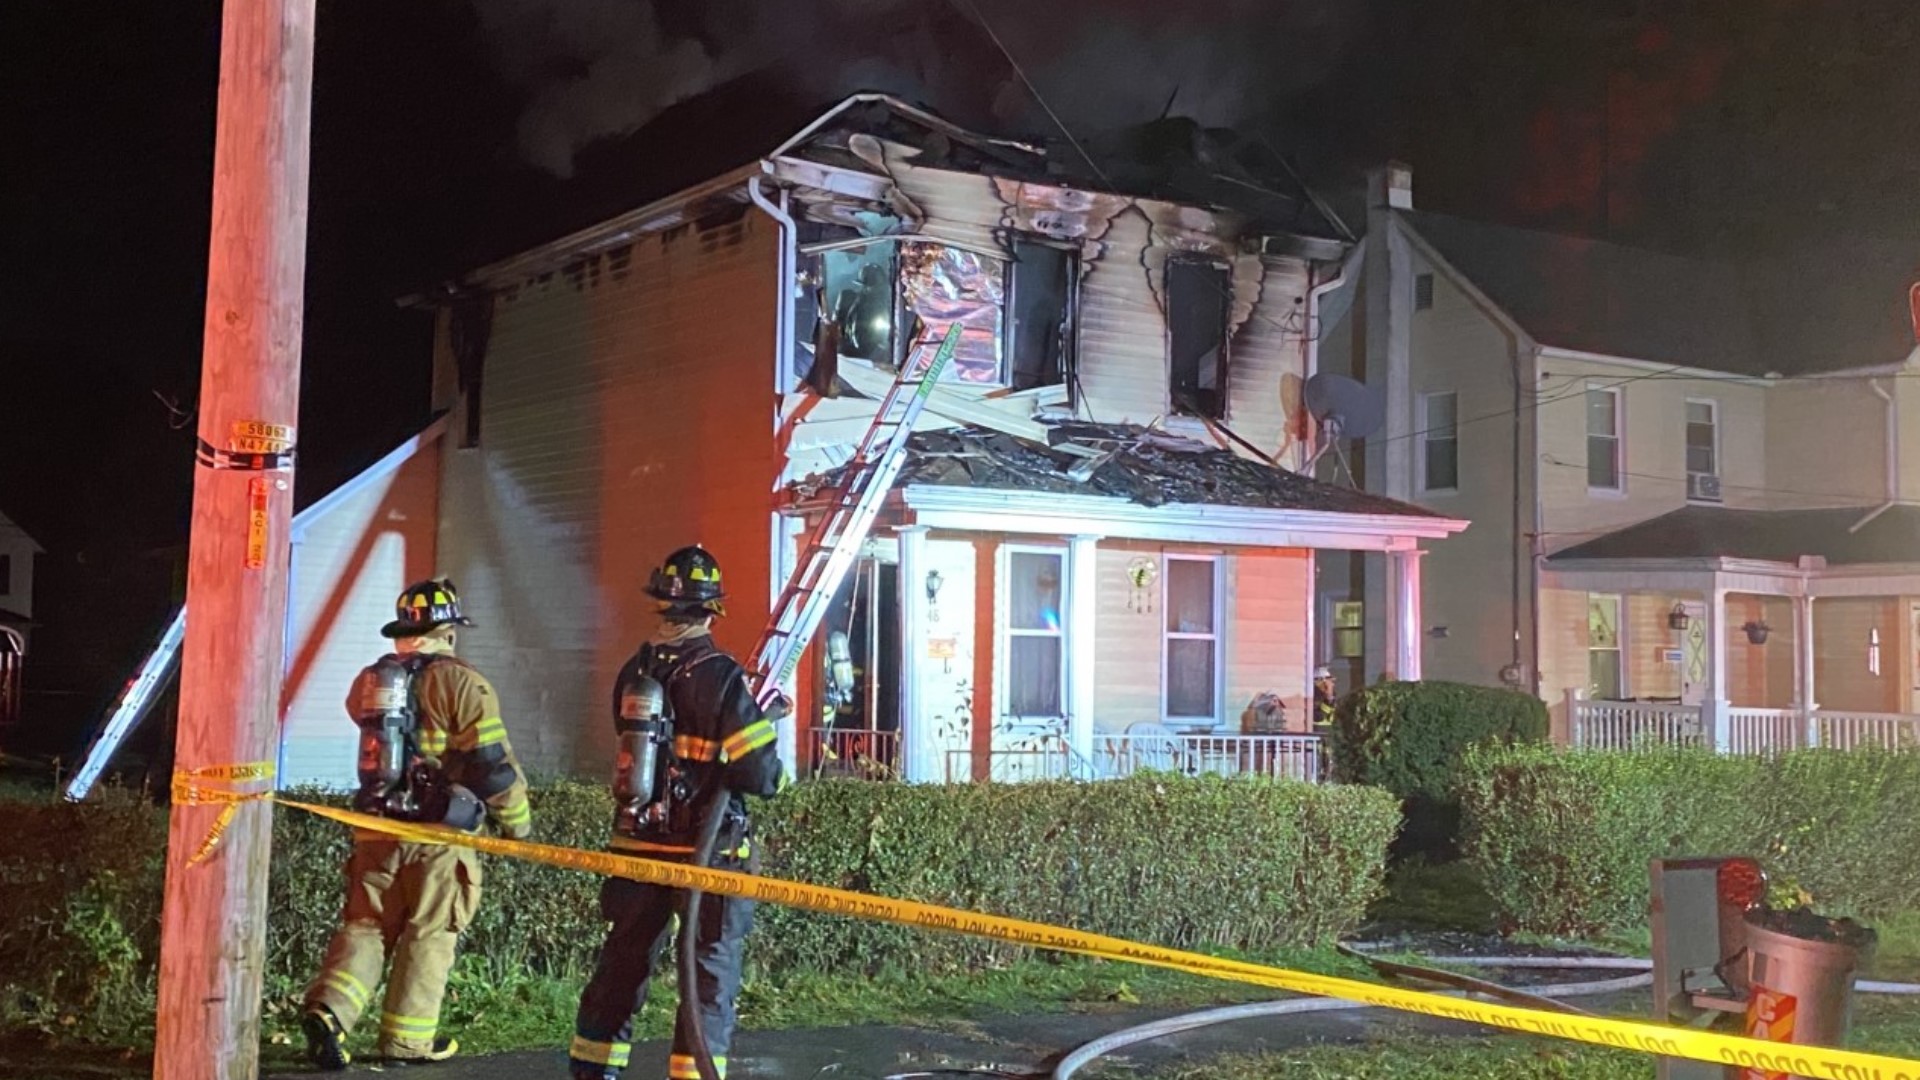 Flames broke out around 11 p.m. Friday night along Boulevard Avenue.